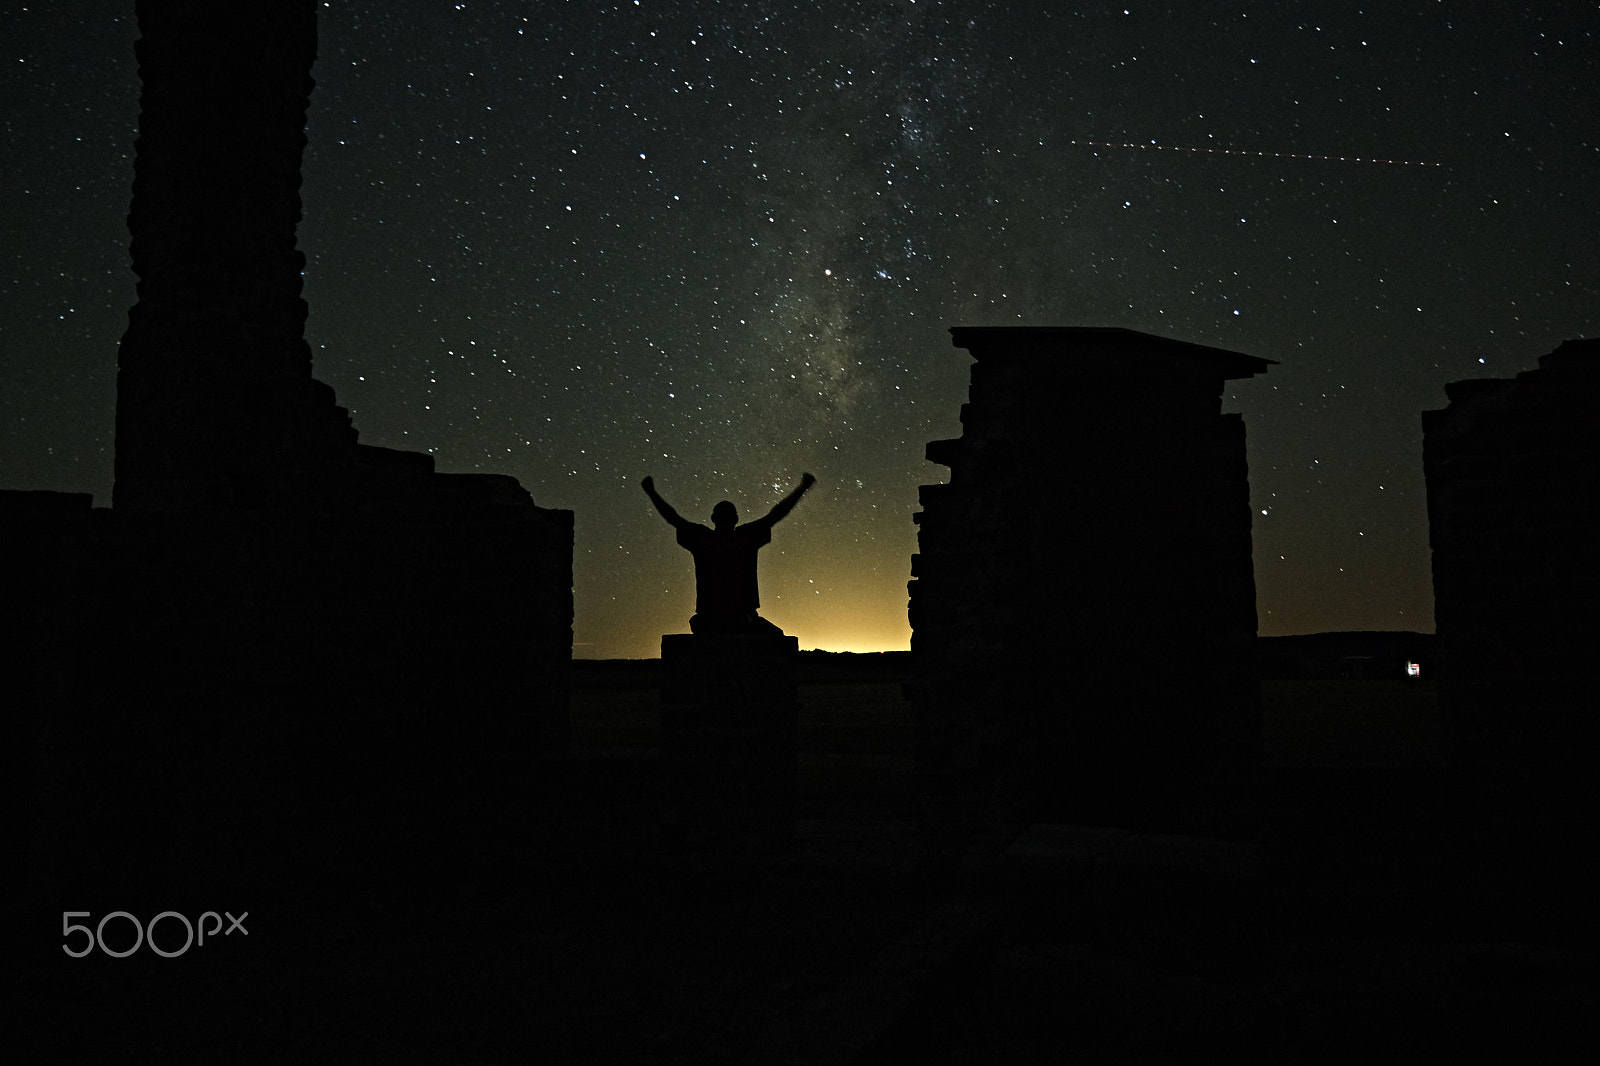 Sony a6000 sample photo. The milky way with silhouette of man. photography